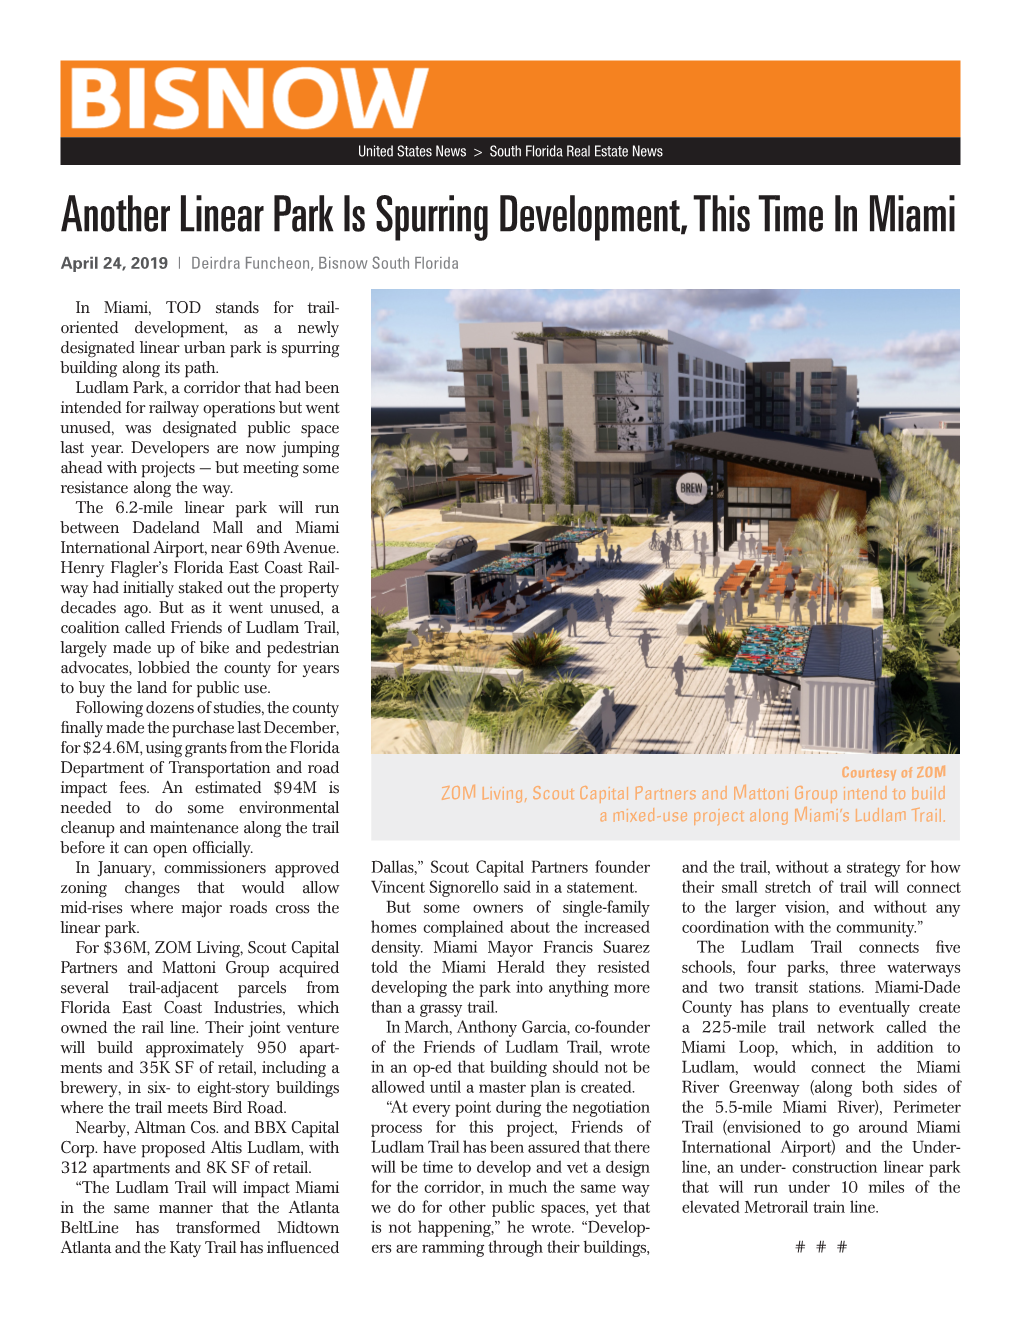 Another Linear Park Is Spurring Development, This Time in Miami April 24, 2019 | Deirdra Funcheon, Bisnow South Florida